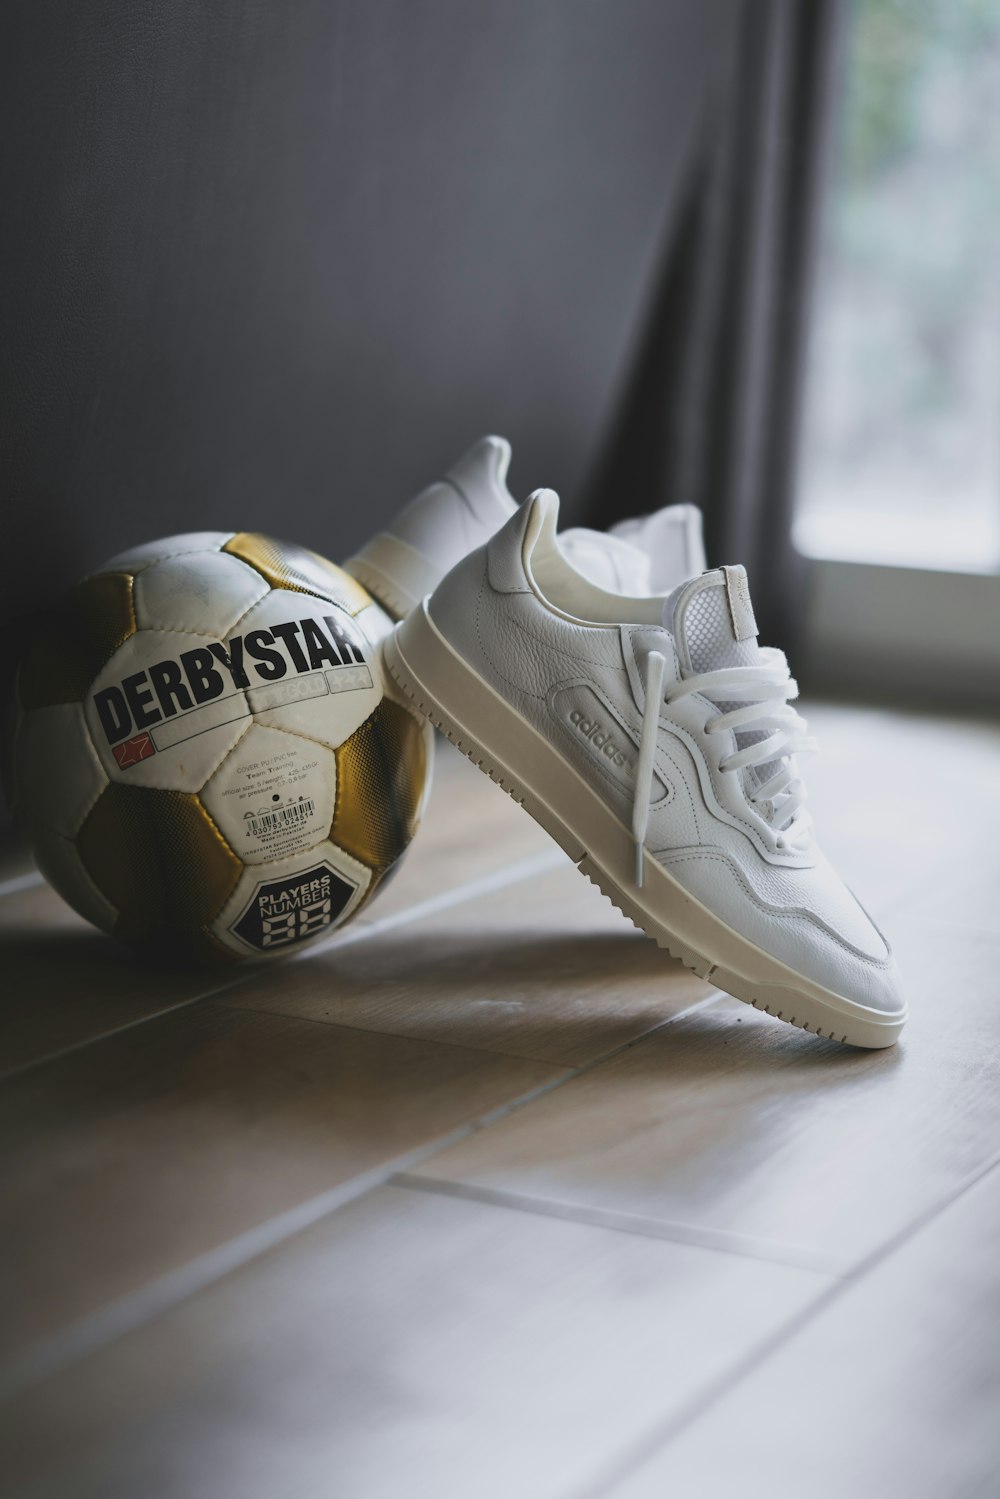 pair of white Adidas low-top sneakers beside Derbystar soccer ball photo –  Free Image on Unsplash